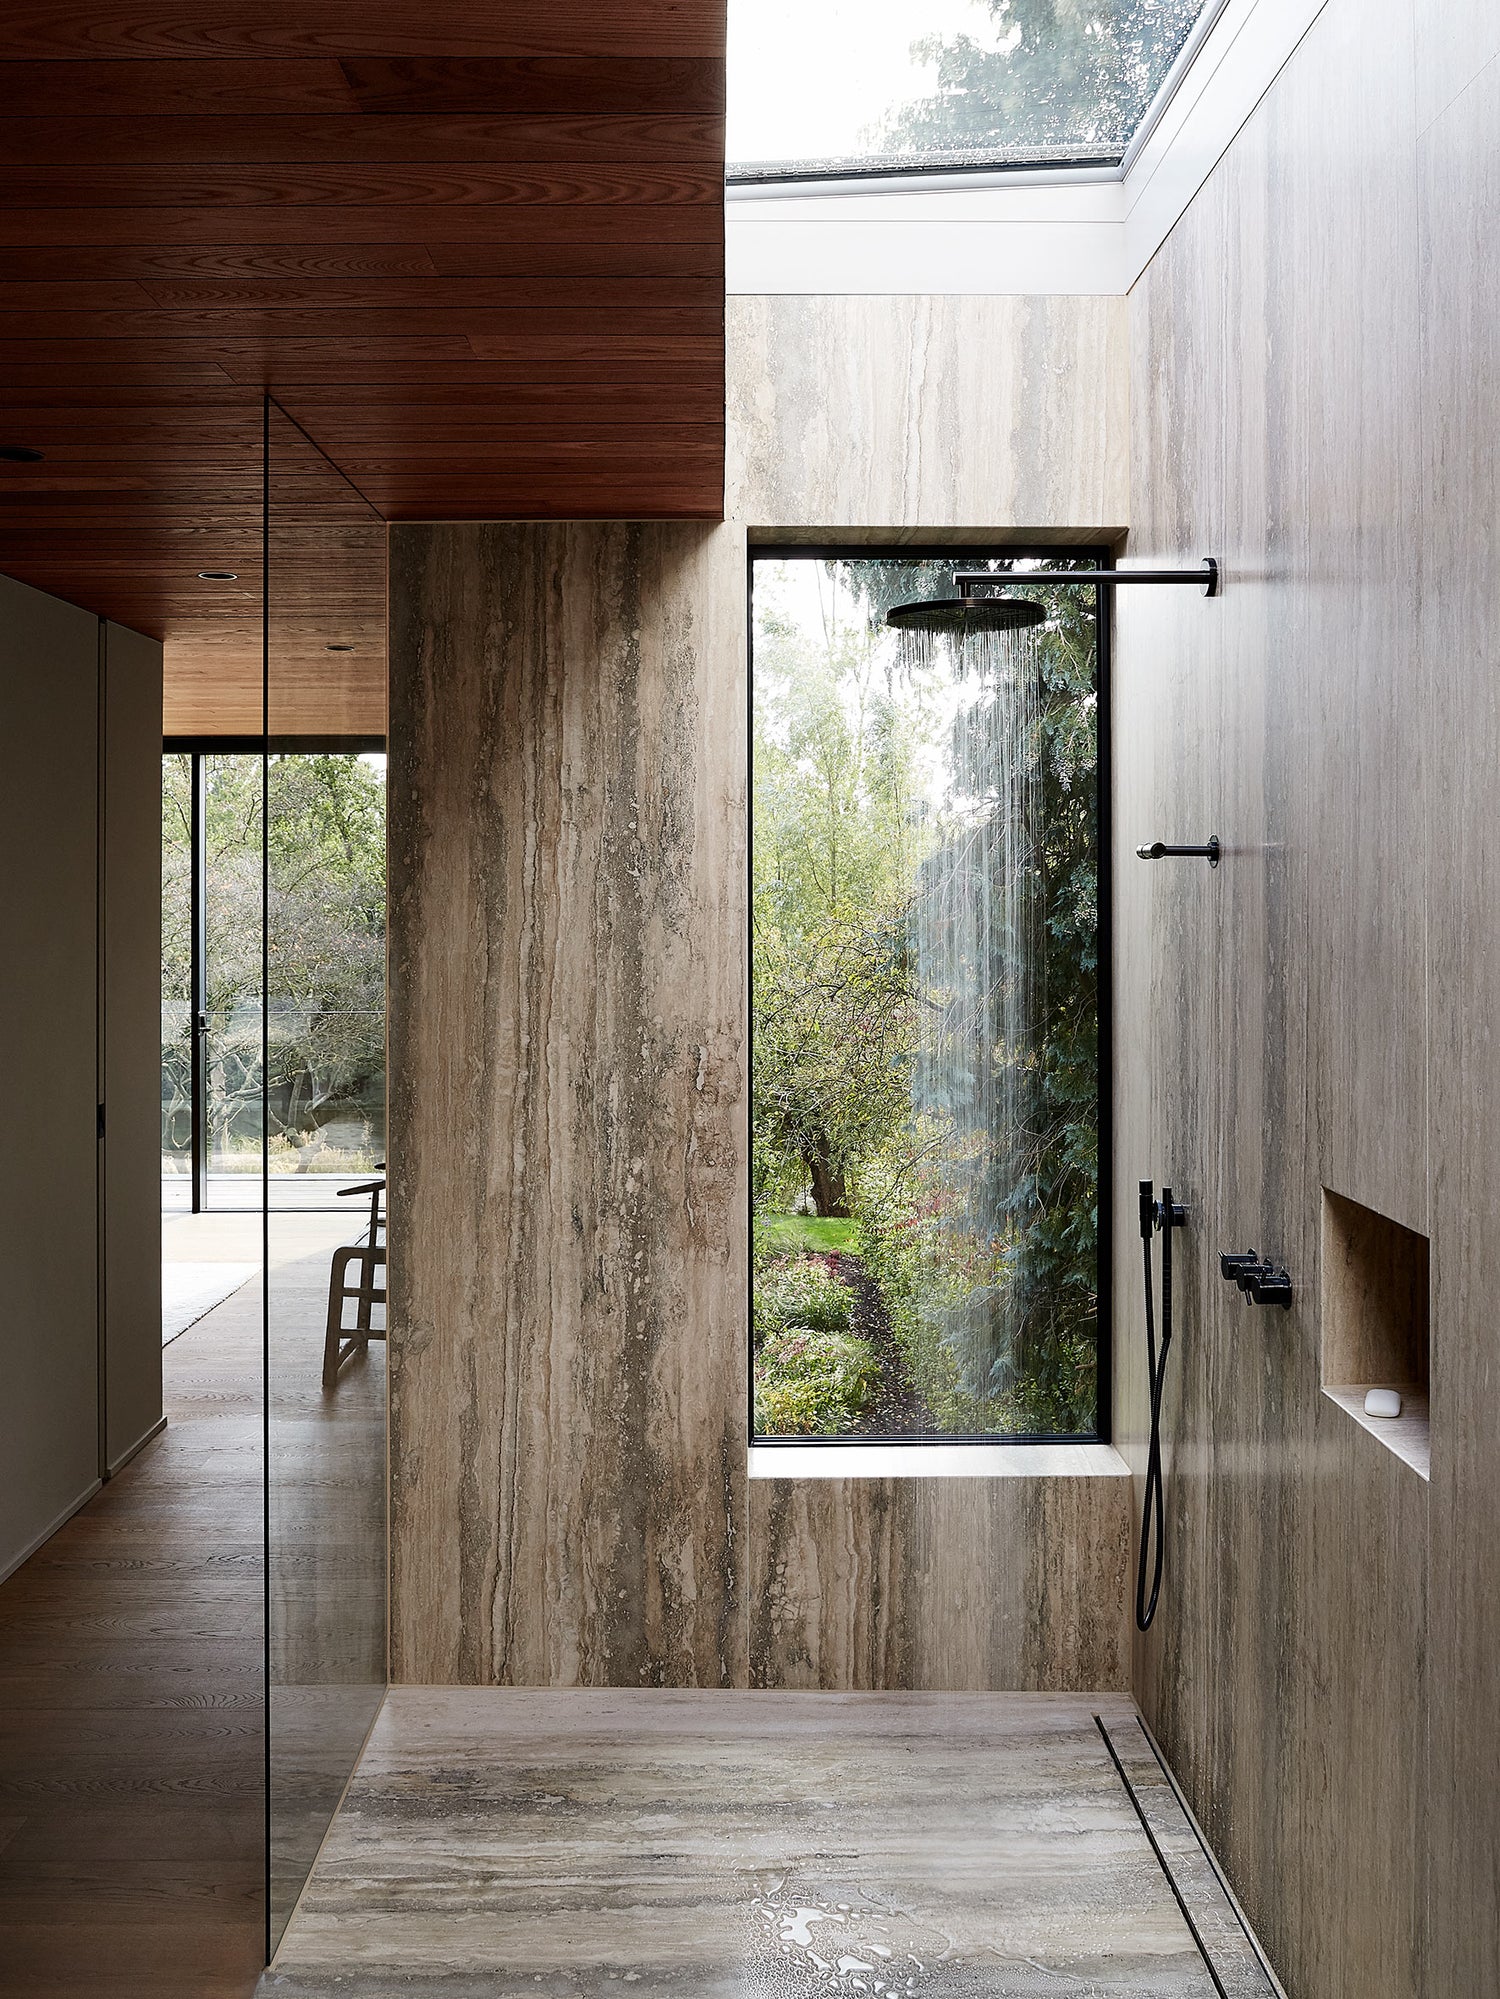 Walk-In Shower with glass ceiling and wall - Artempo Interior Architecture Design - Kasia Gatkowska for ELLE